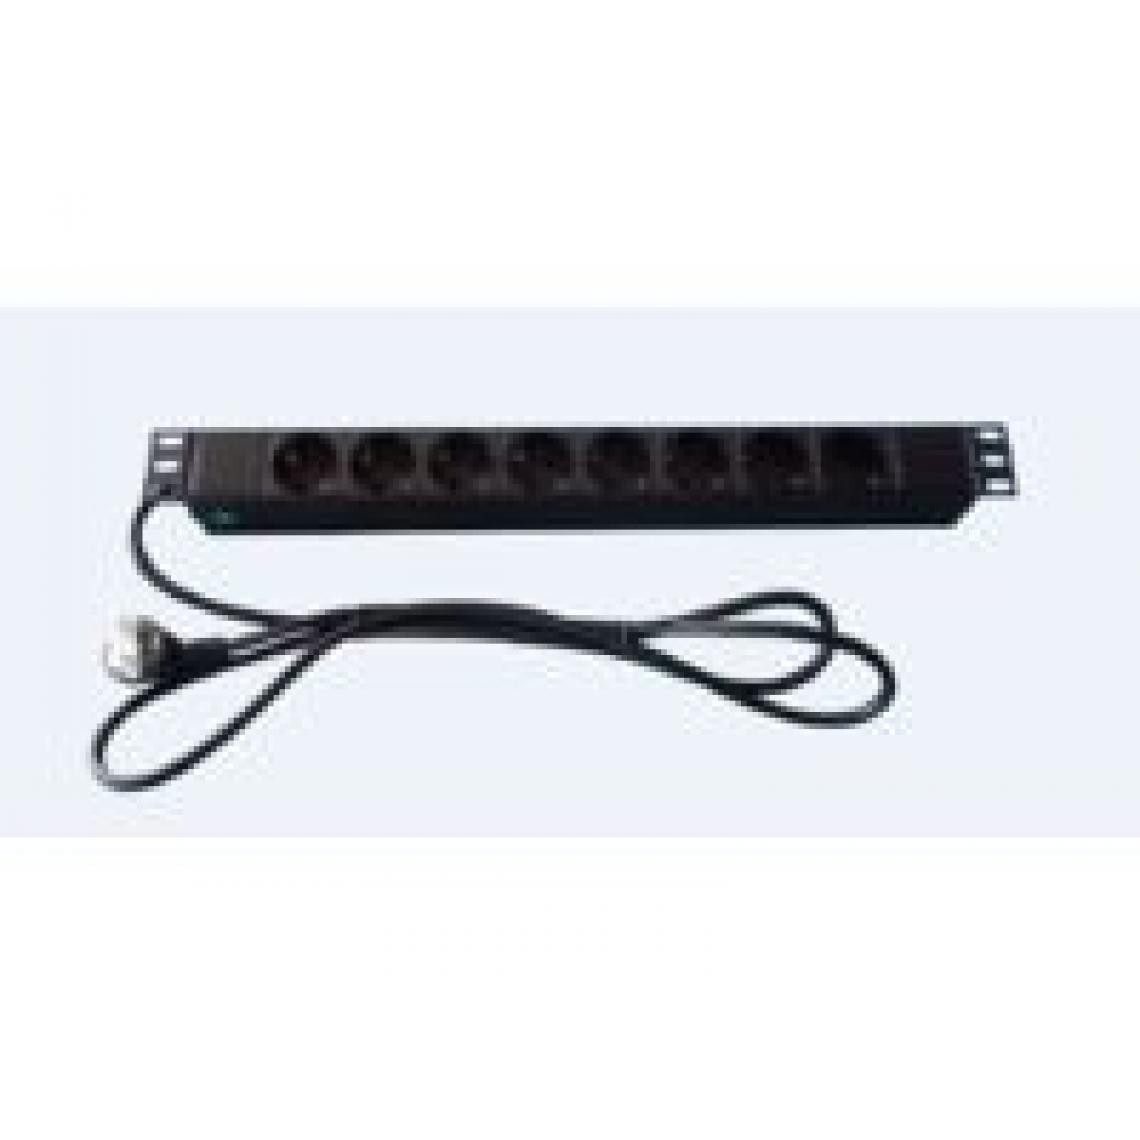 Inconnu - 8-way Outlet strip,19`` 2meter 1U 44*44*483mm PDU 8xCEE 7/4 16A, 4000W - Alimentation modulaire